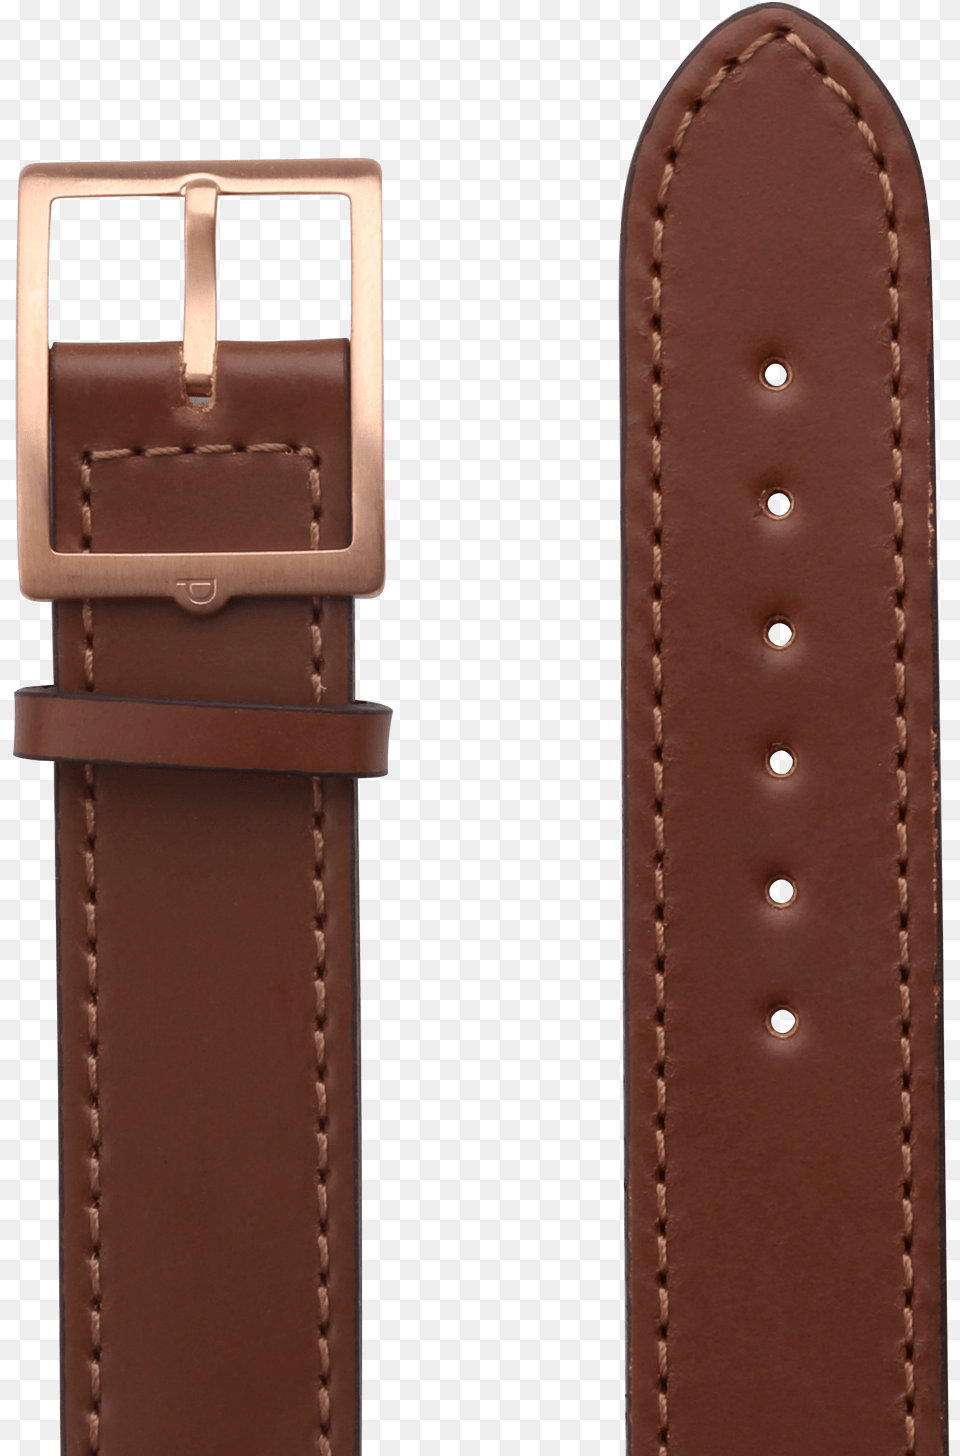 Shell Cordovan Strap Strap, Accessories, Belt, Mailbox Png